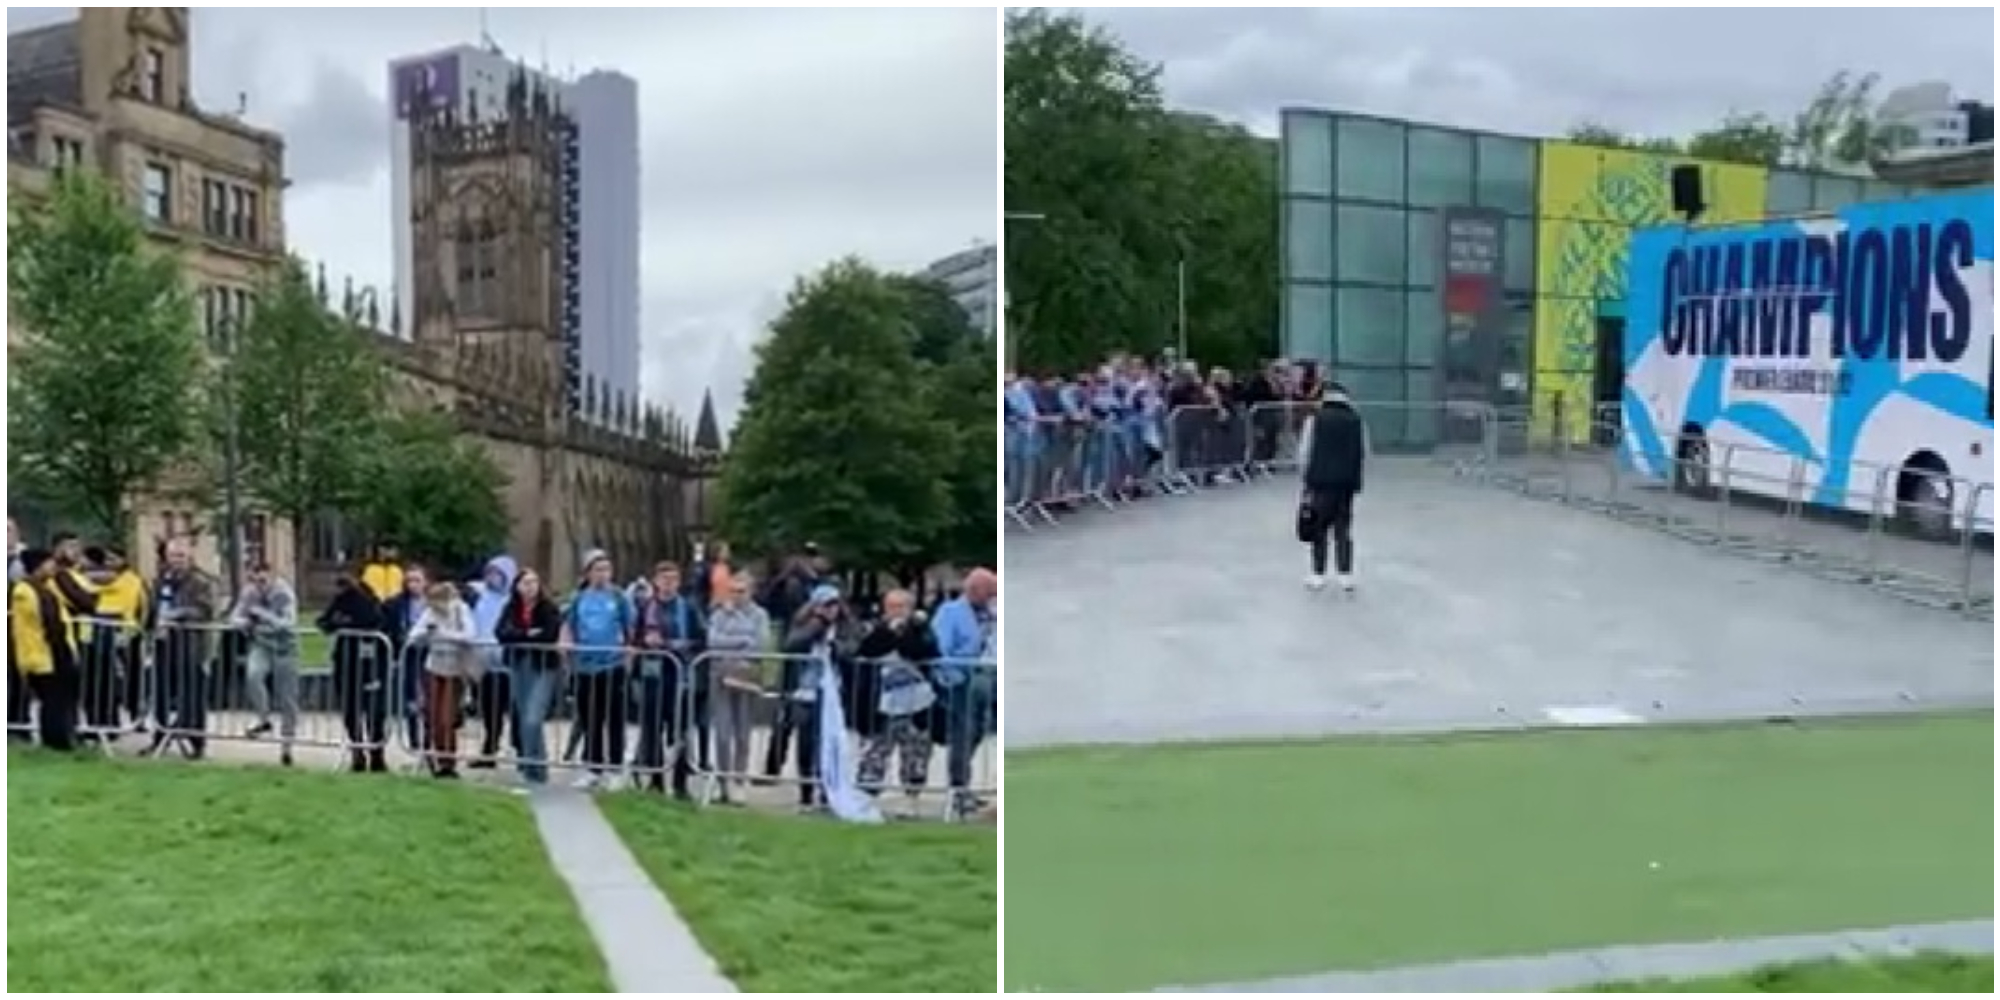 (Video) Embarrassing scenes as only a few Manchester City fans seen waiting for PL trophy parade an hour before buses set off